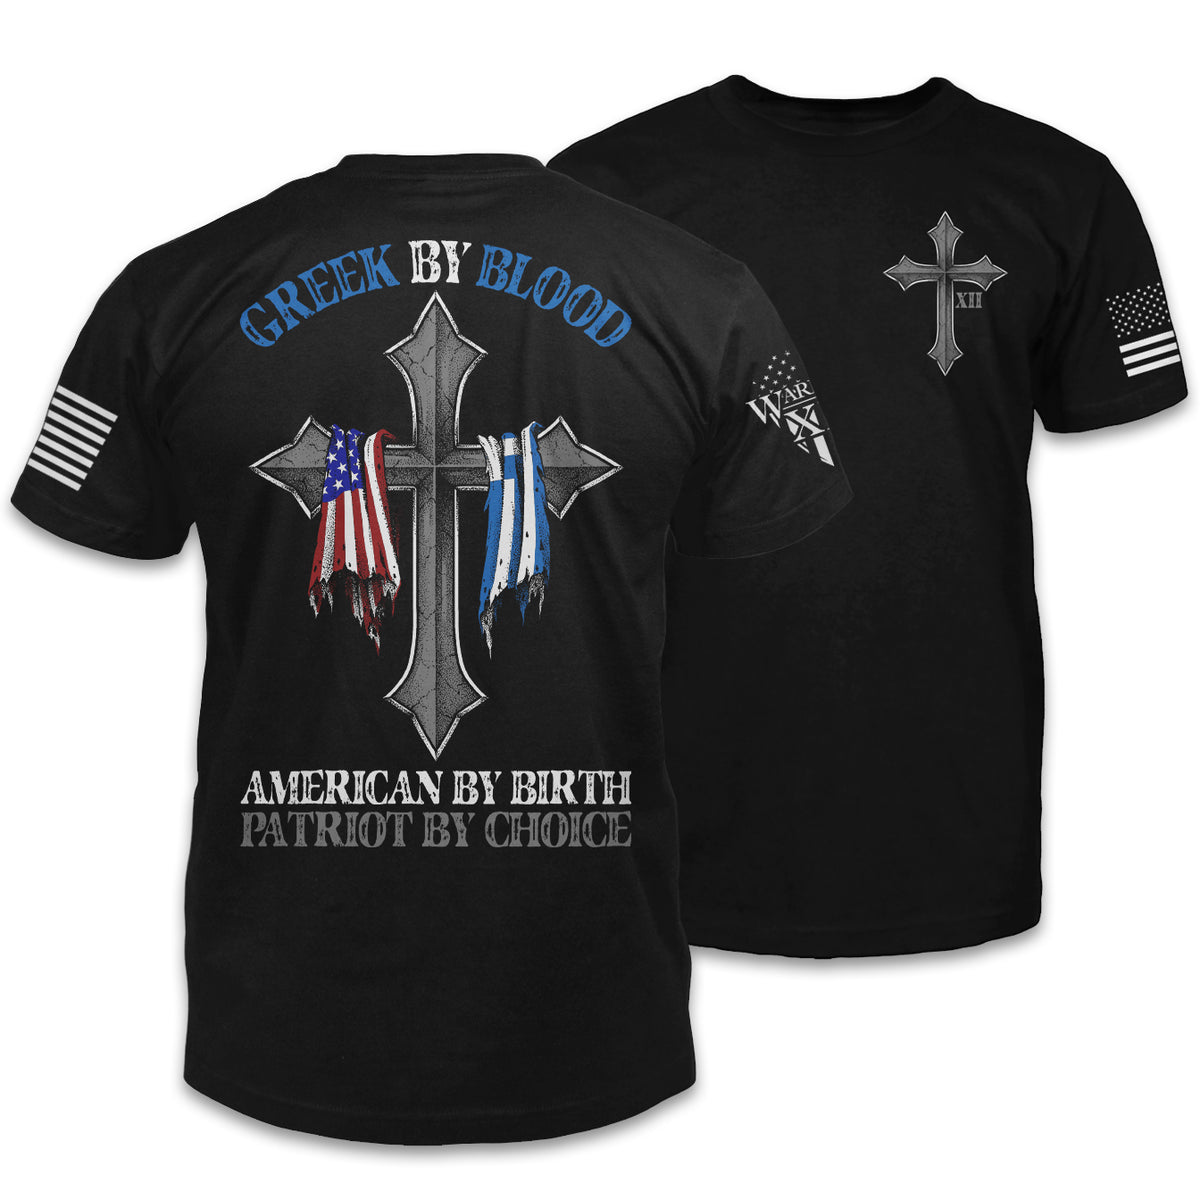 Front & back black t-shirt with the words 'Greek by blood, American by birth, patriot by choice" and a cross with the Greek and USA flag hanging over it printed on the shirt.